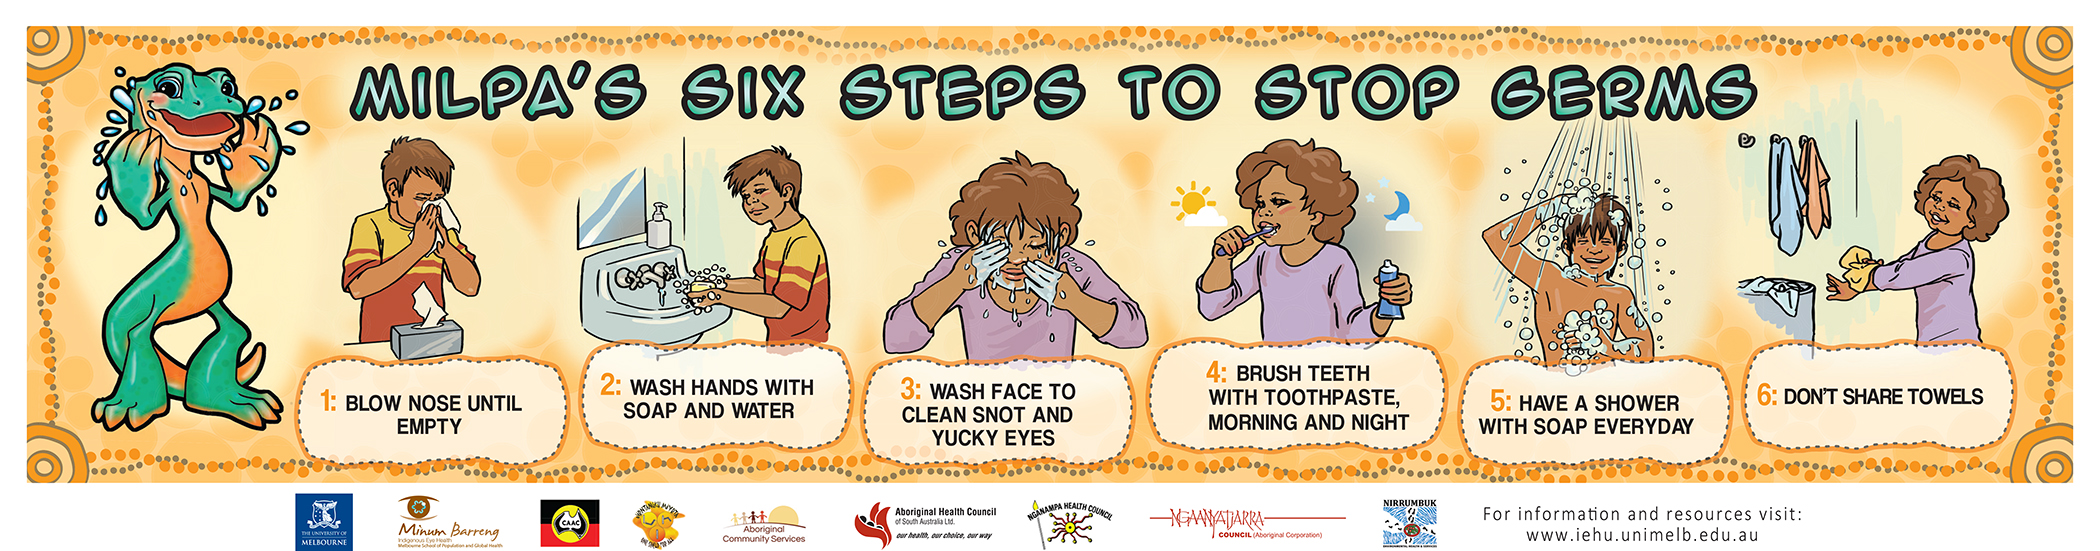 milpas 6 step to stop germ with illustrations